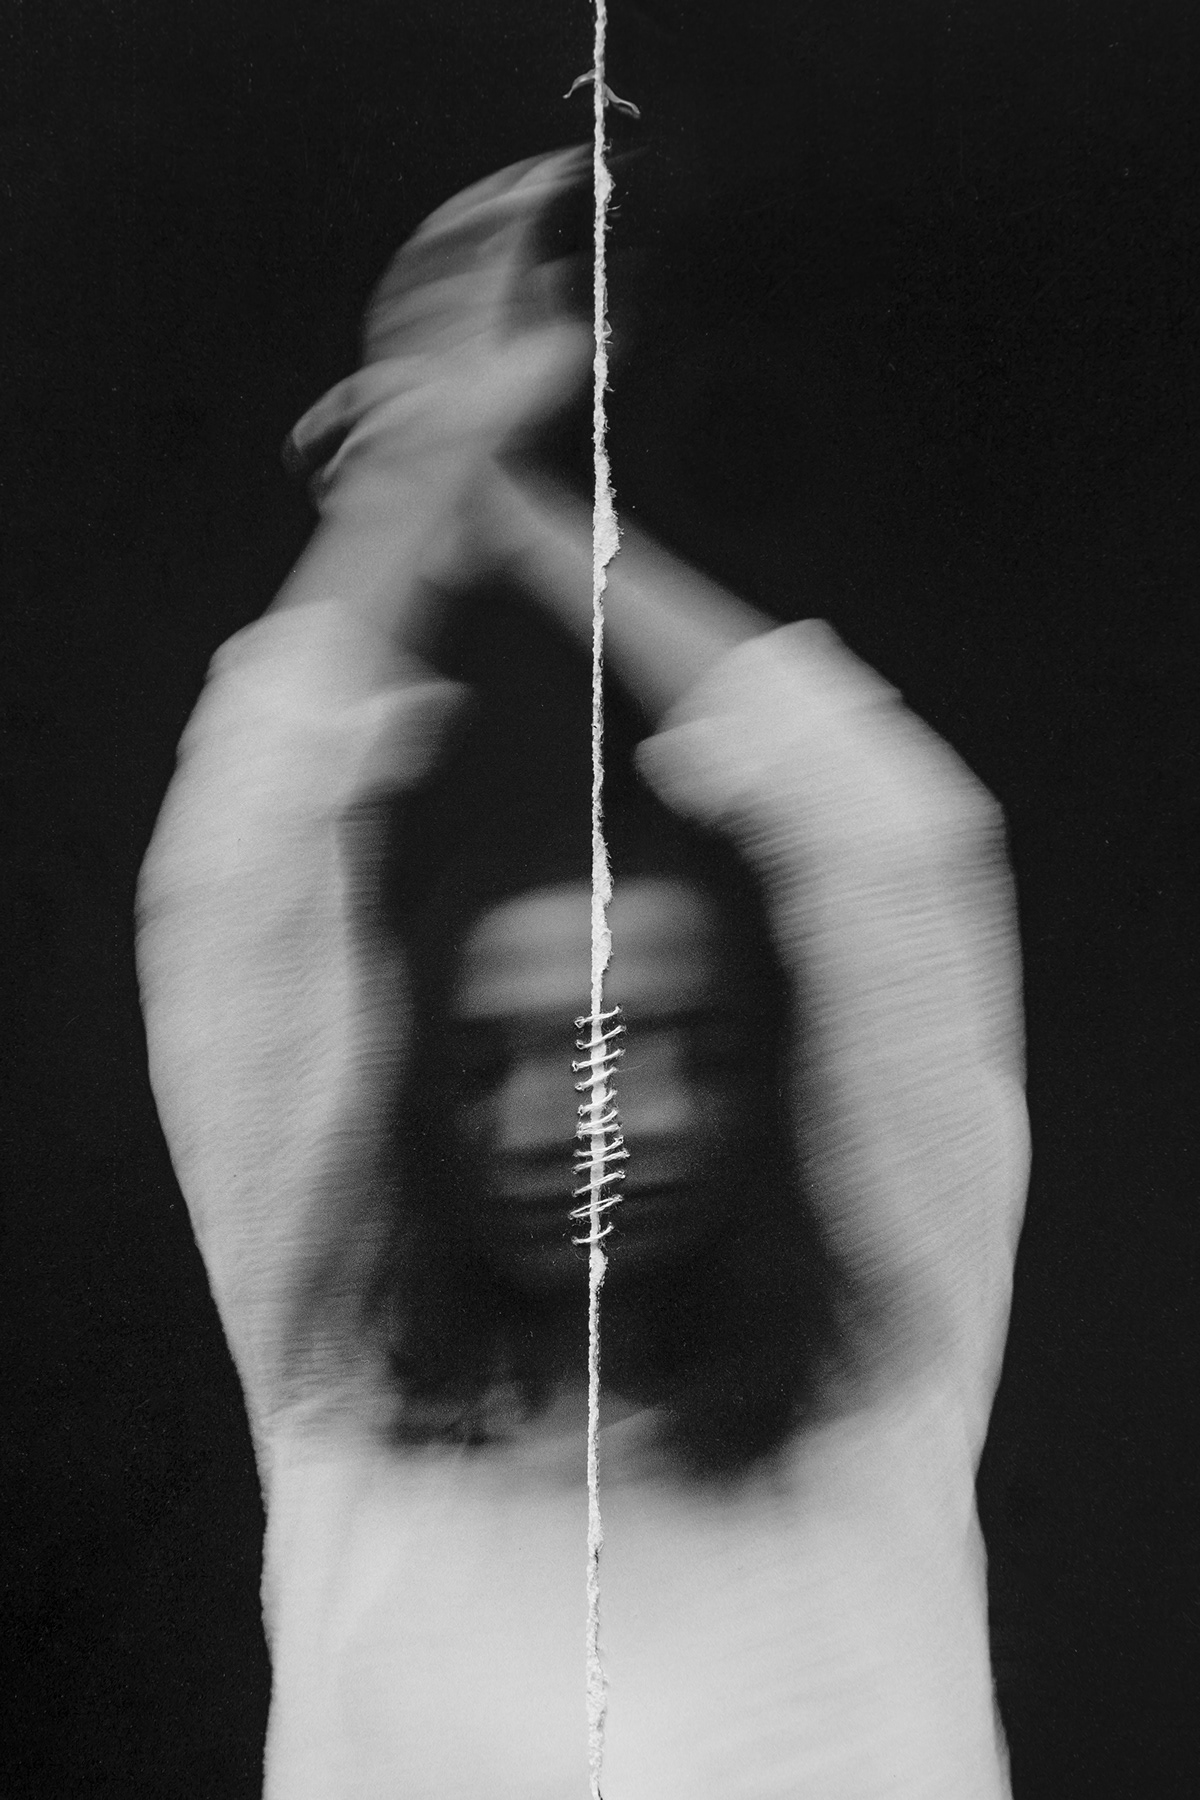 self portrait conceptual photography mixed media black and white fine art collage